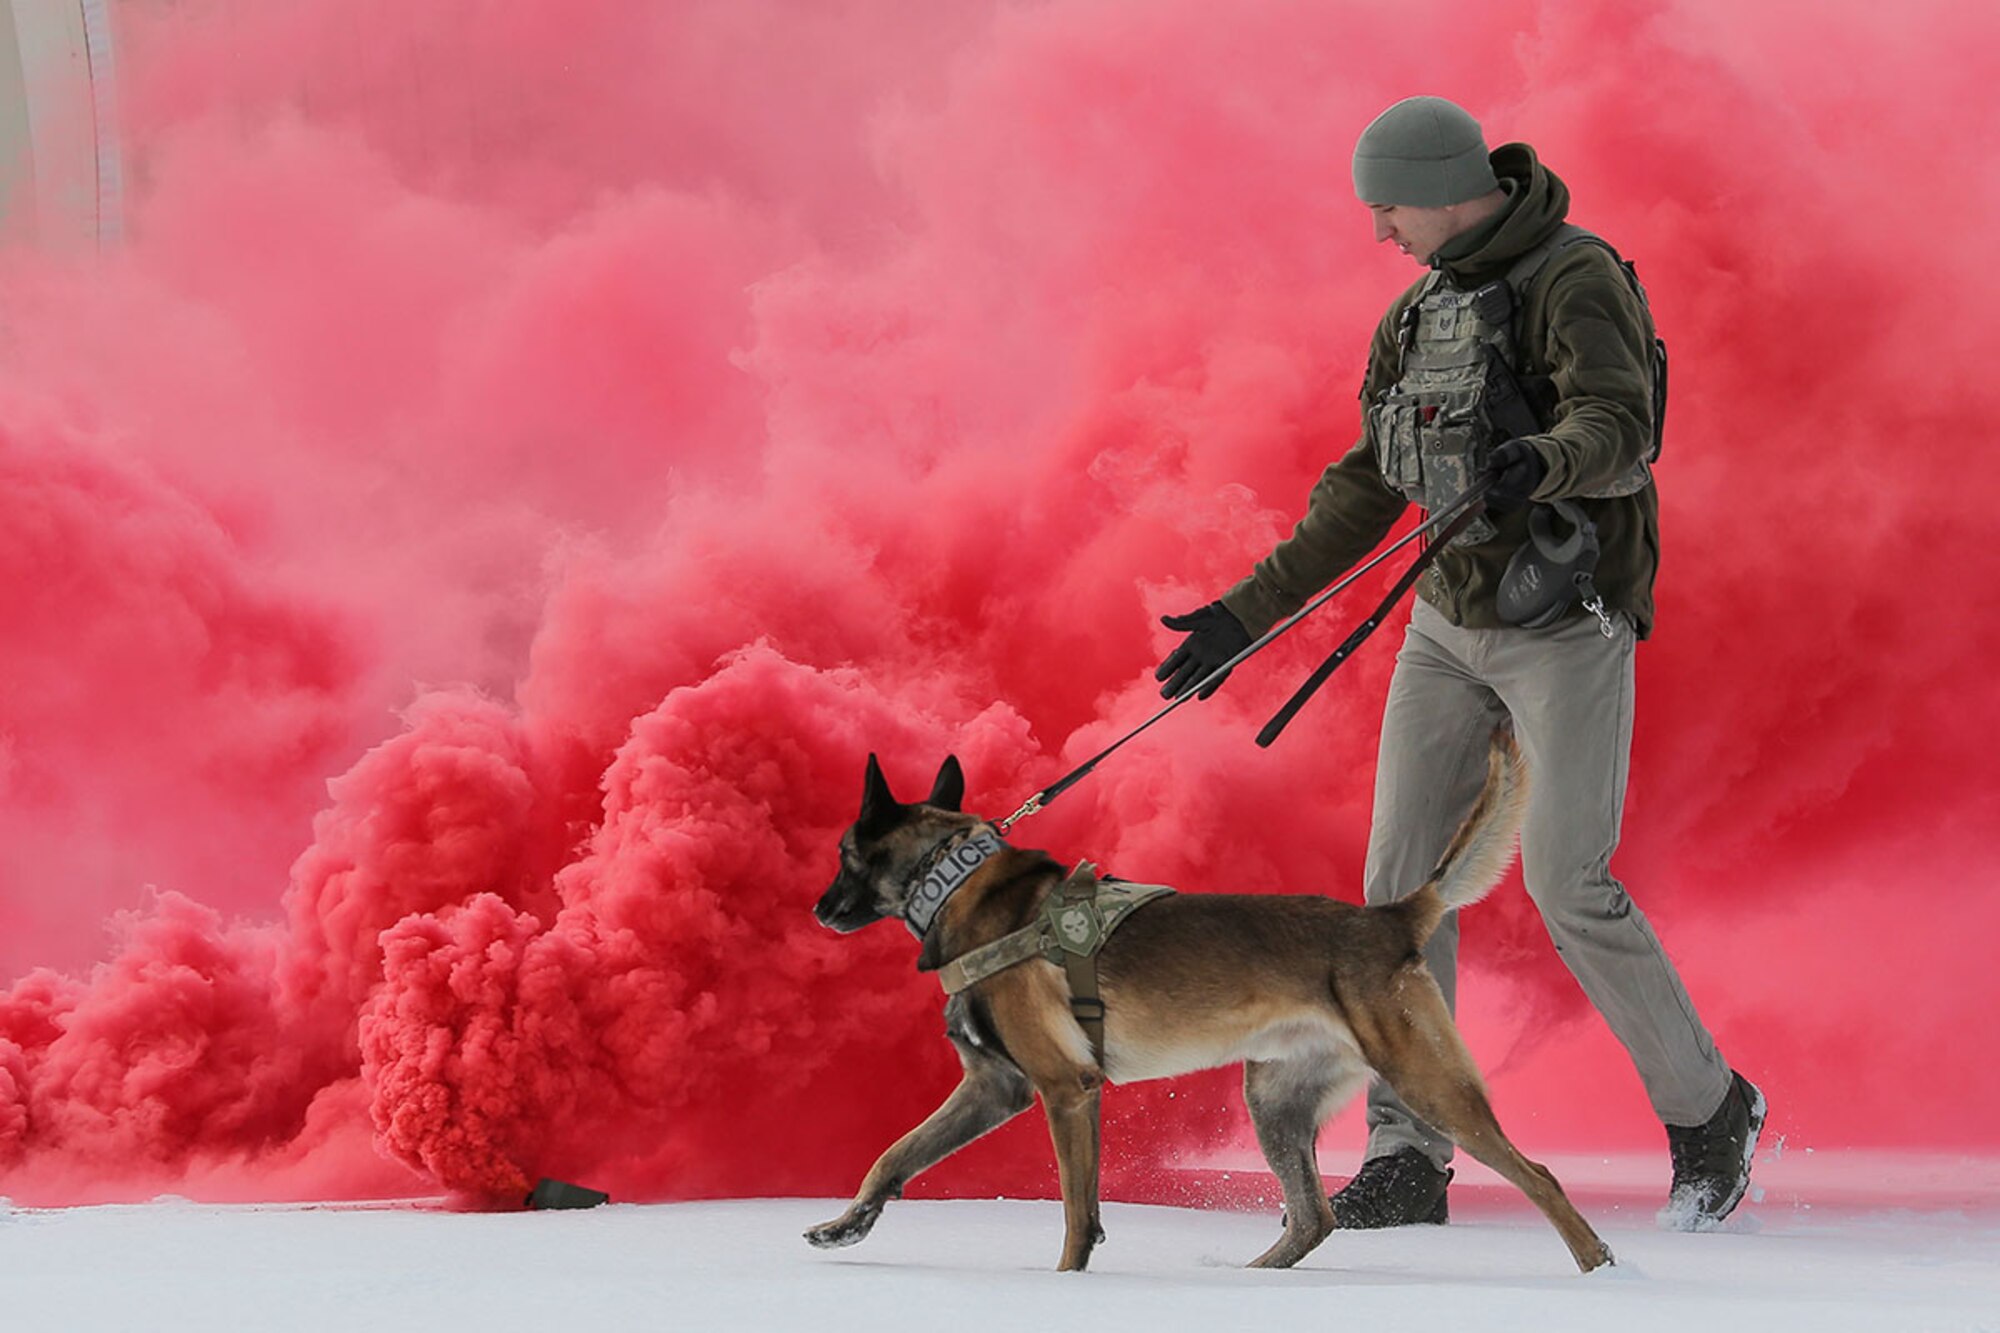 U.S. Air Force Staff Sgt. Joe Burns and military working dog, Ciko, assigned to the 673d Security Forces Squadron, conduct K-9 training at Joint Base Elmendorf-Richardson, Alaska, March 17, 2016. The Security Forces Airmen conducted the K-9 training with their Army counterparts, assigned to the 549th Military Working Dog Detachment, to keep their teams flexible to respond to law enforcement emergencies and for overseas deployments. (U.S. Air Force photo/Alejandro Peña)